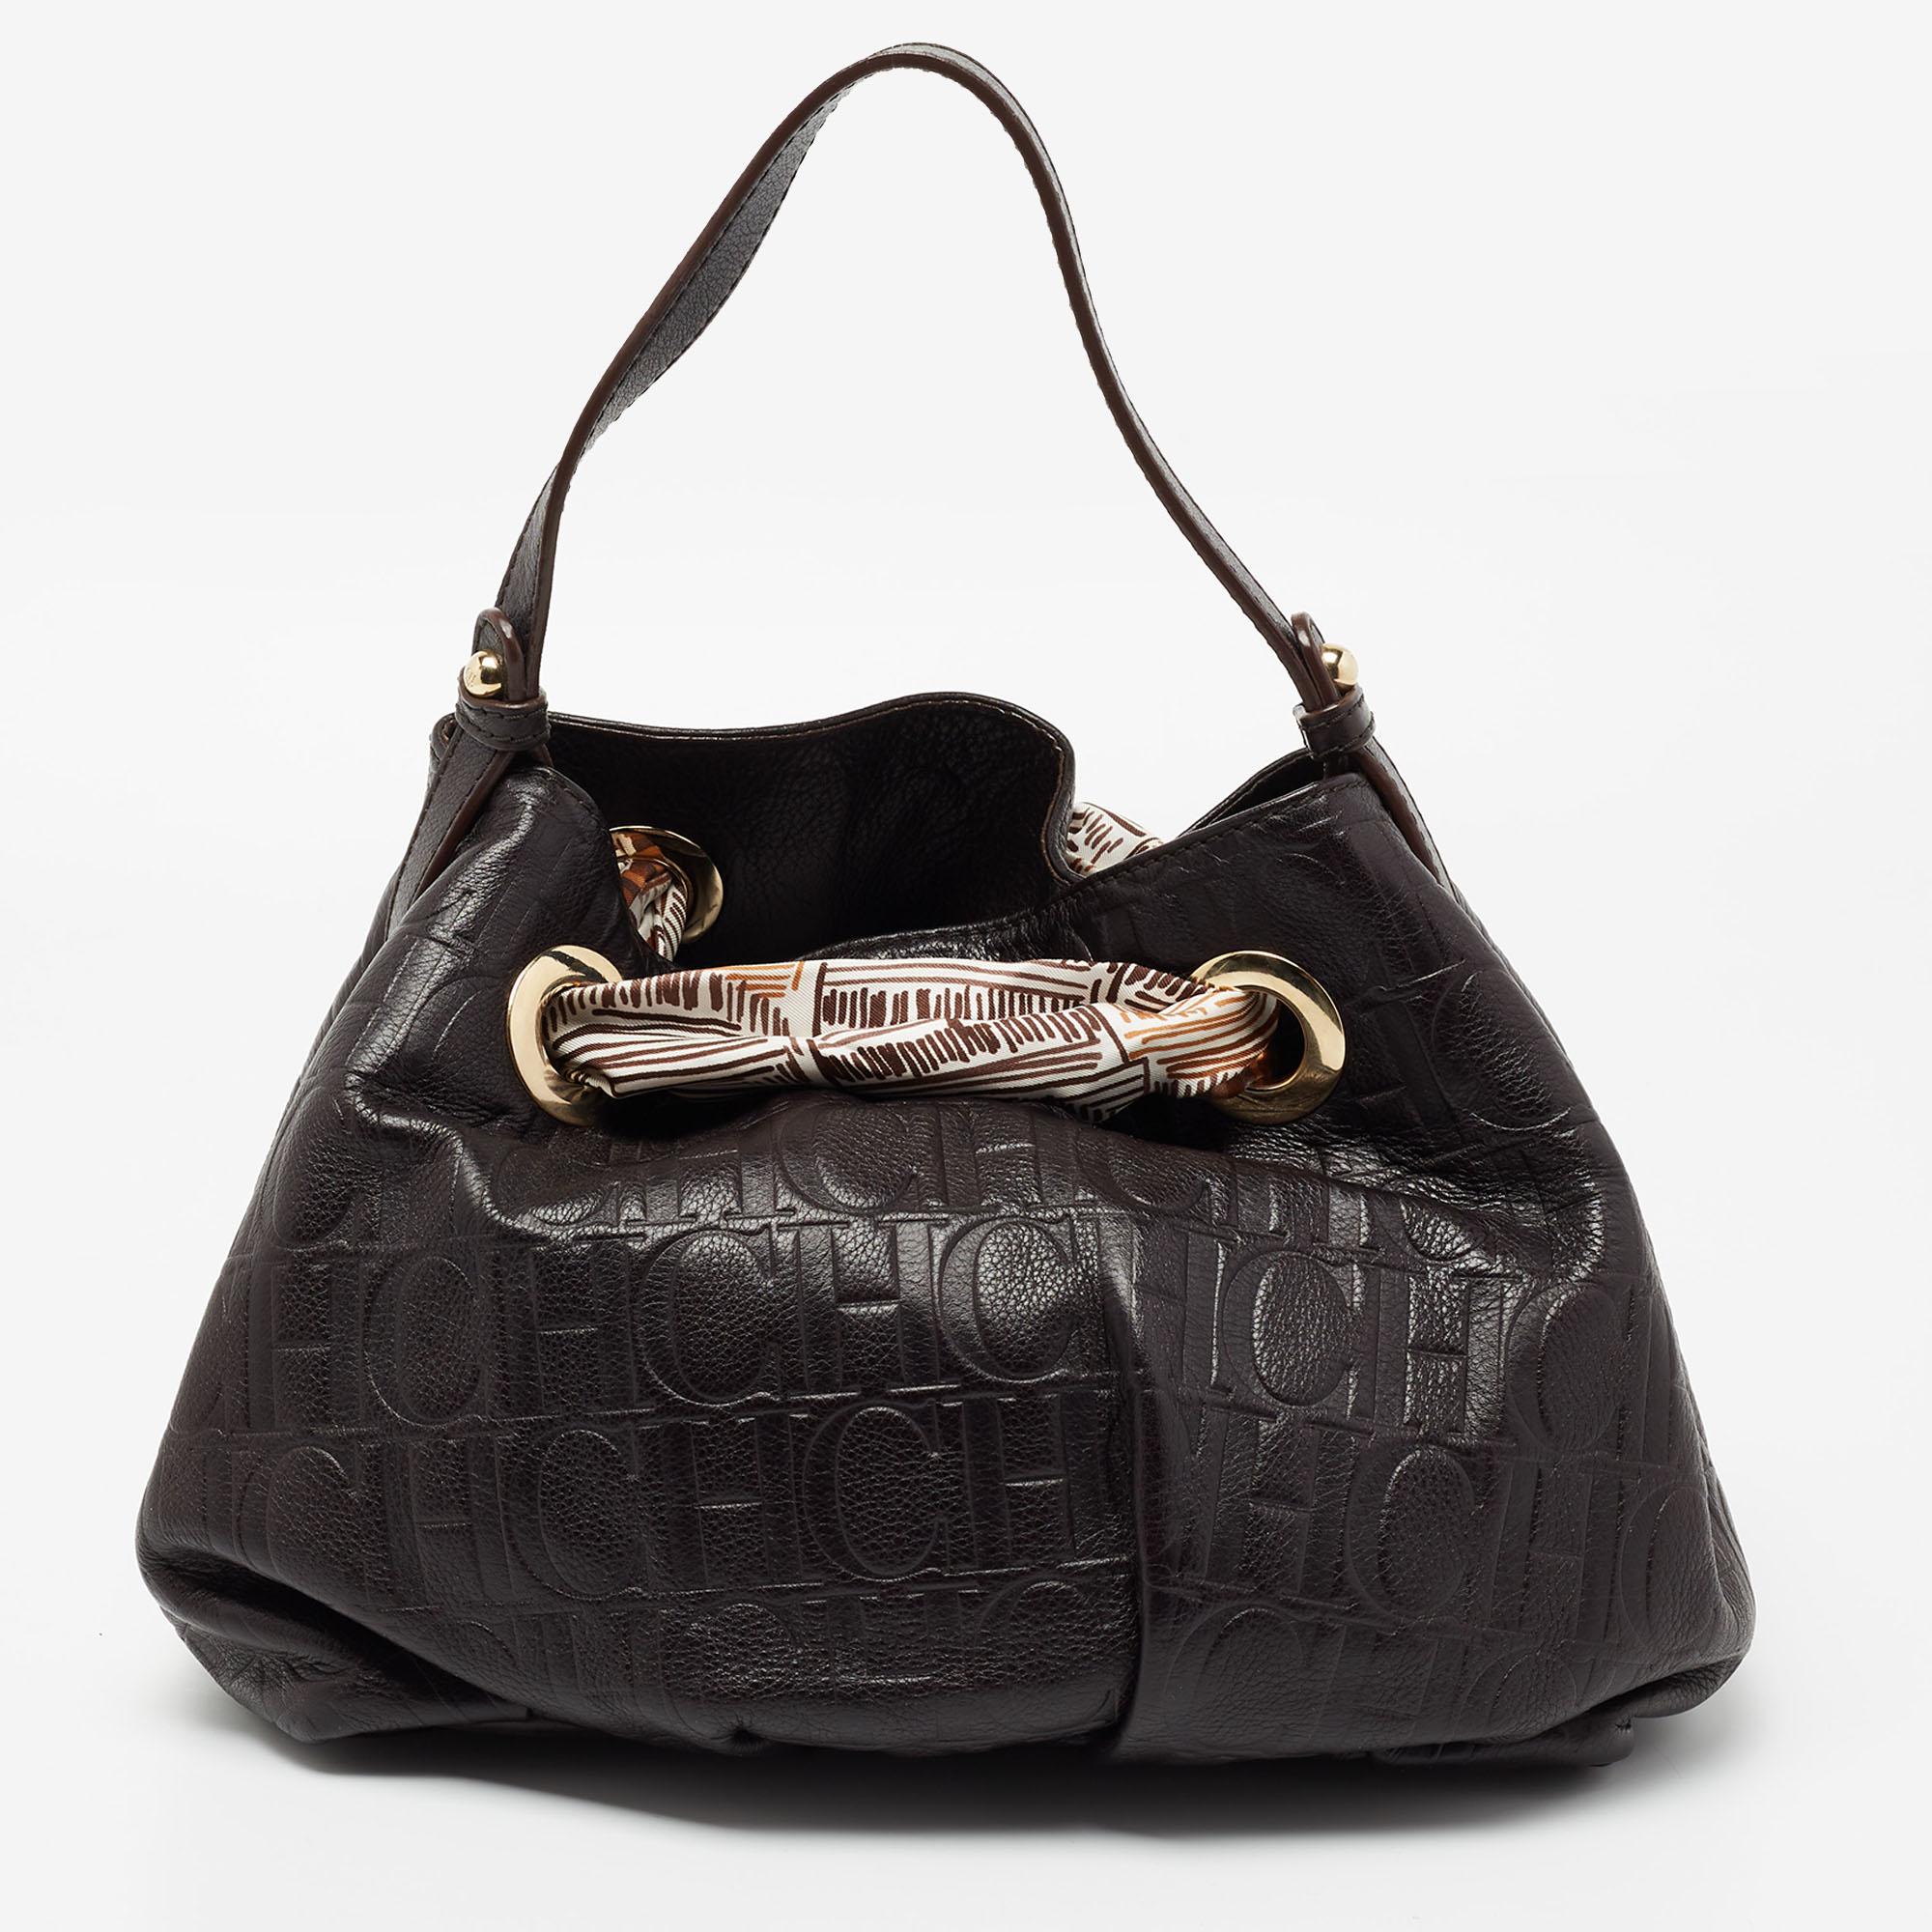 This CH Carolina Herrera hobo is great for everyday use. Crafted from Monogram embossed leather, this dark brown hobo is handy and stylish with a signature appeal. It has a single handle, a fabric interior, scarf detailing, and gold-tone